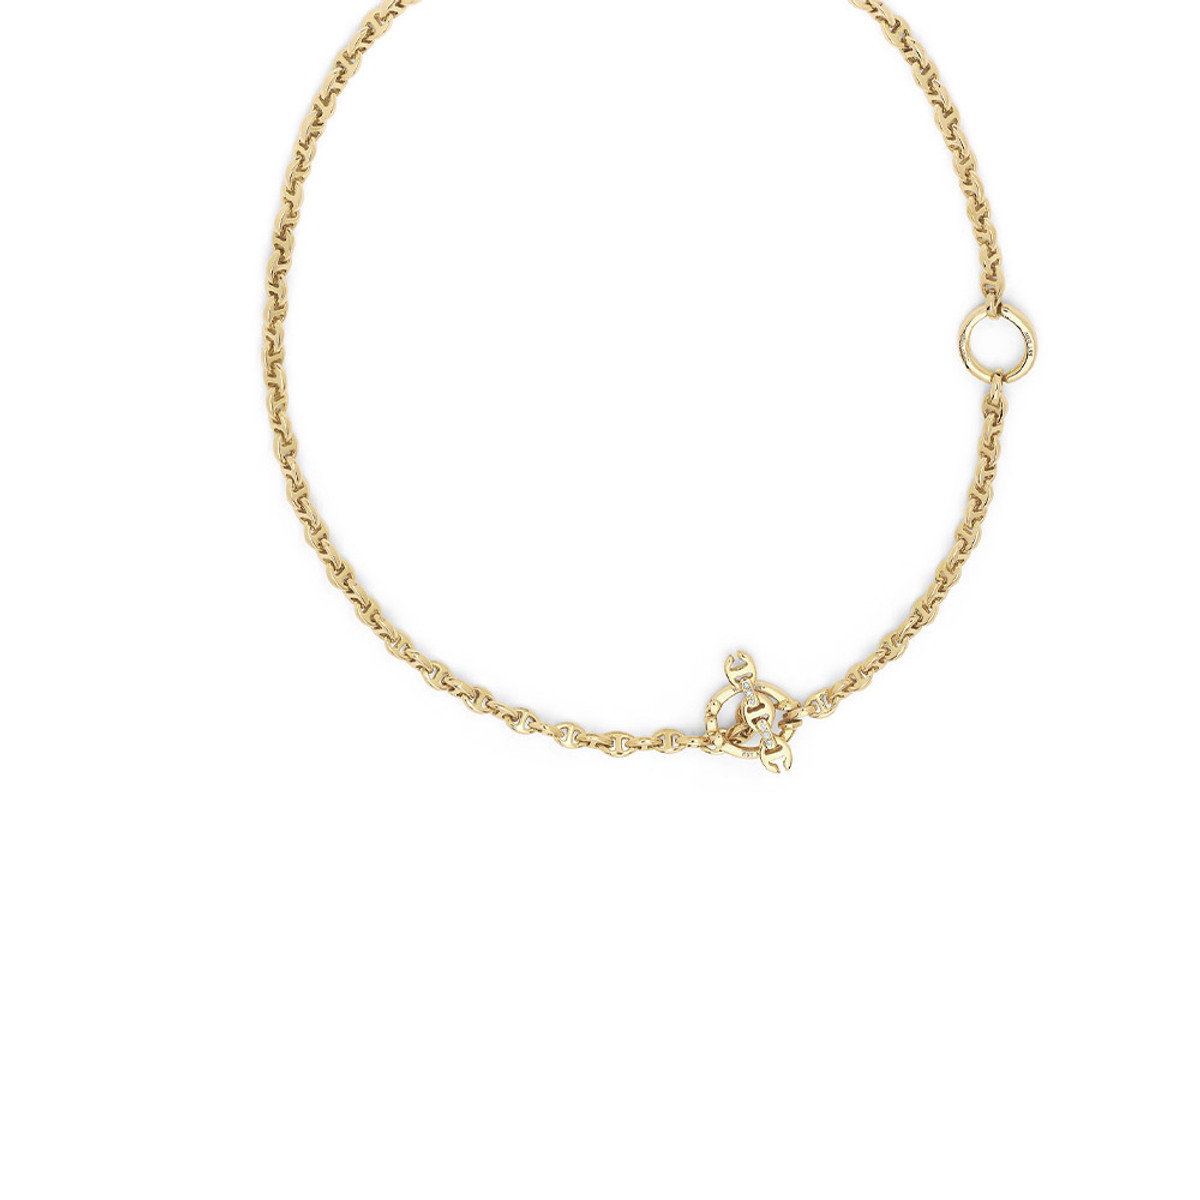 Hoorsenbuhs 18K Yellow Gold Open- Link Necklace with Diamond Toggle- 22"-57477 Product Image